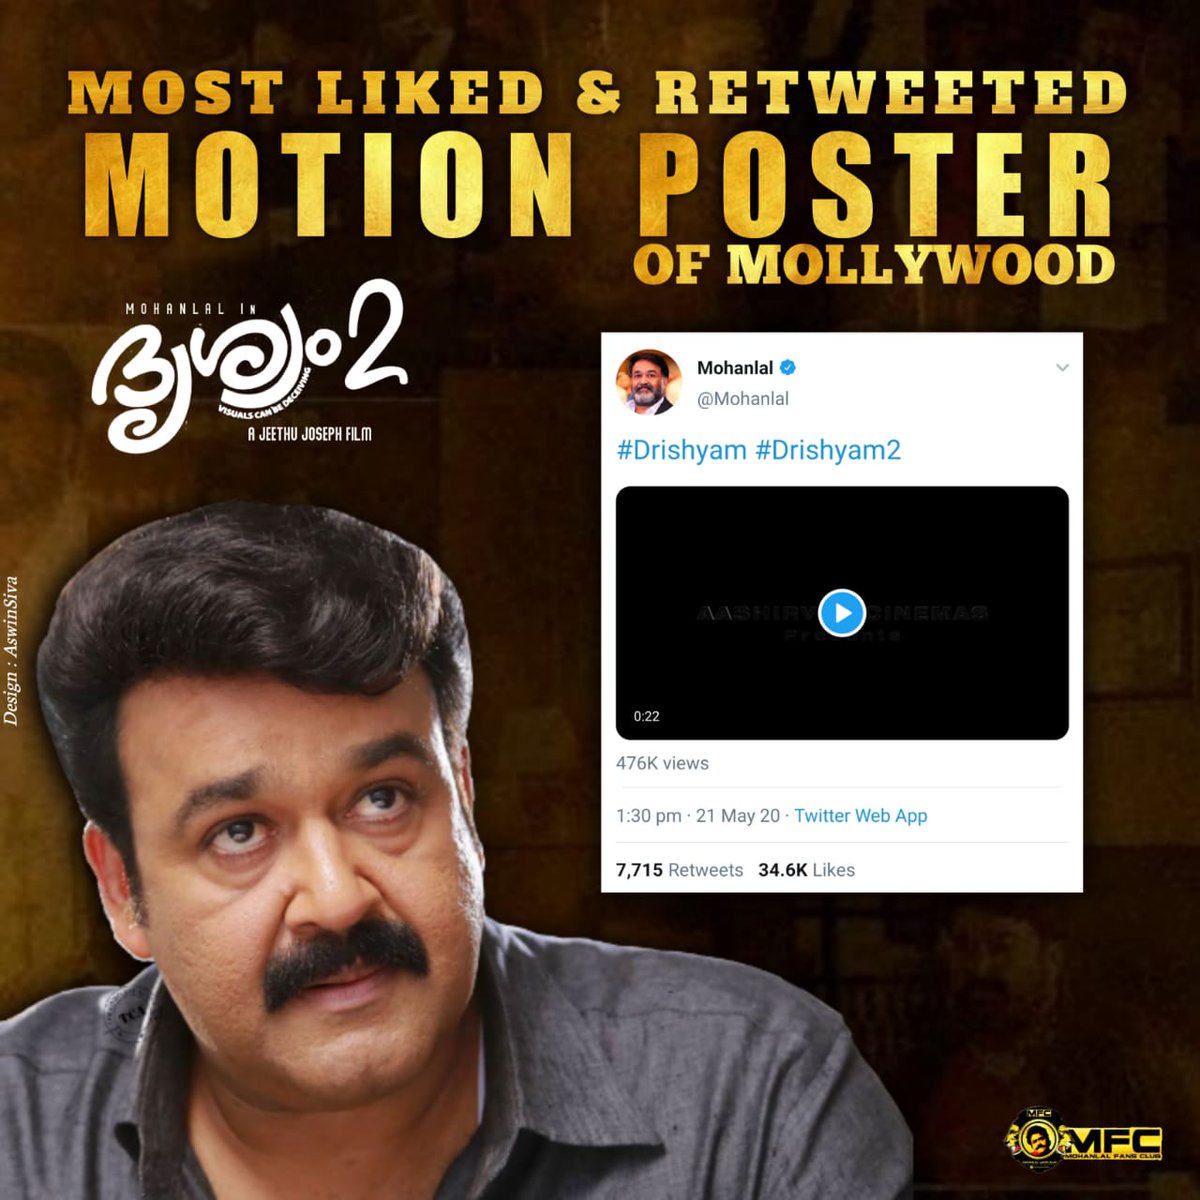 Most Retweeted & Liked Motion Poster in Mollywood 🔥

Most Tweeted Motion Poster in Mollywood : 100.2k Tweets 🔥

The Brand Mollywood Movie : #Drishyam2 😌🔥 | @Mohanlal